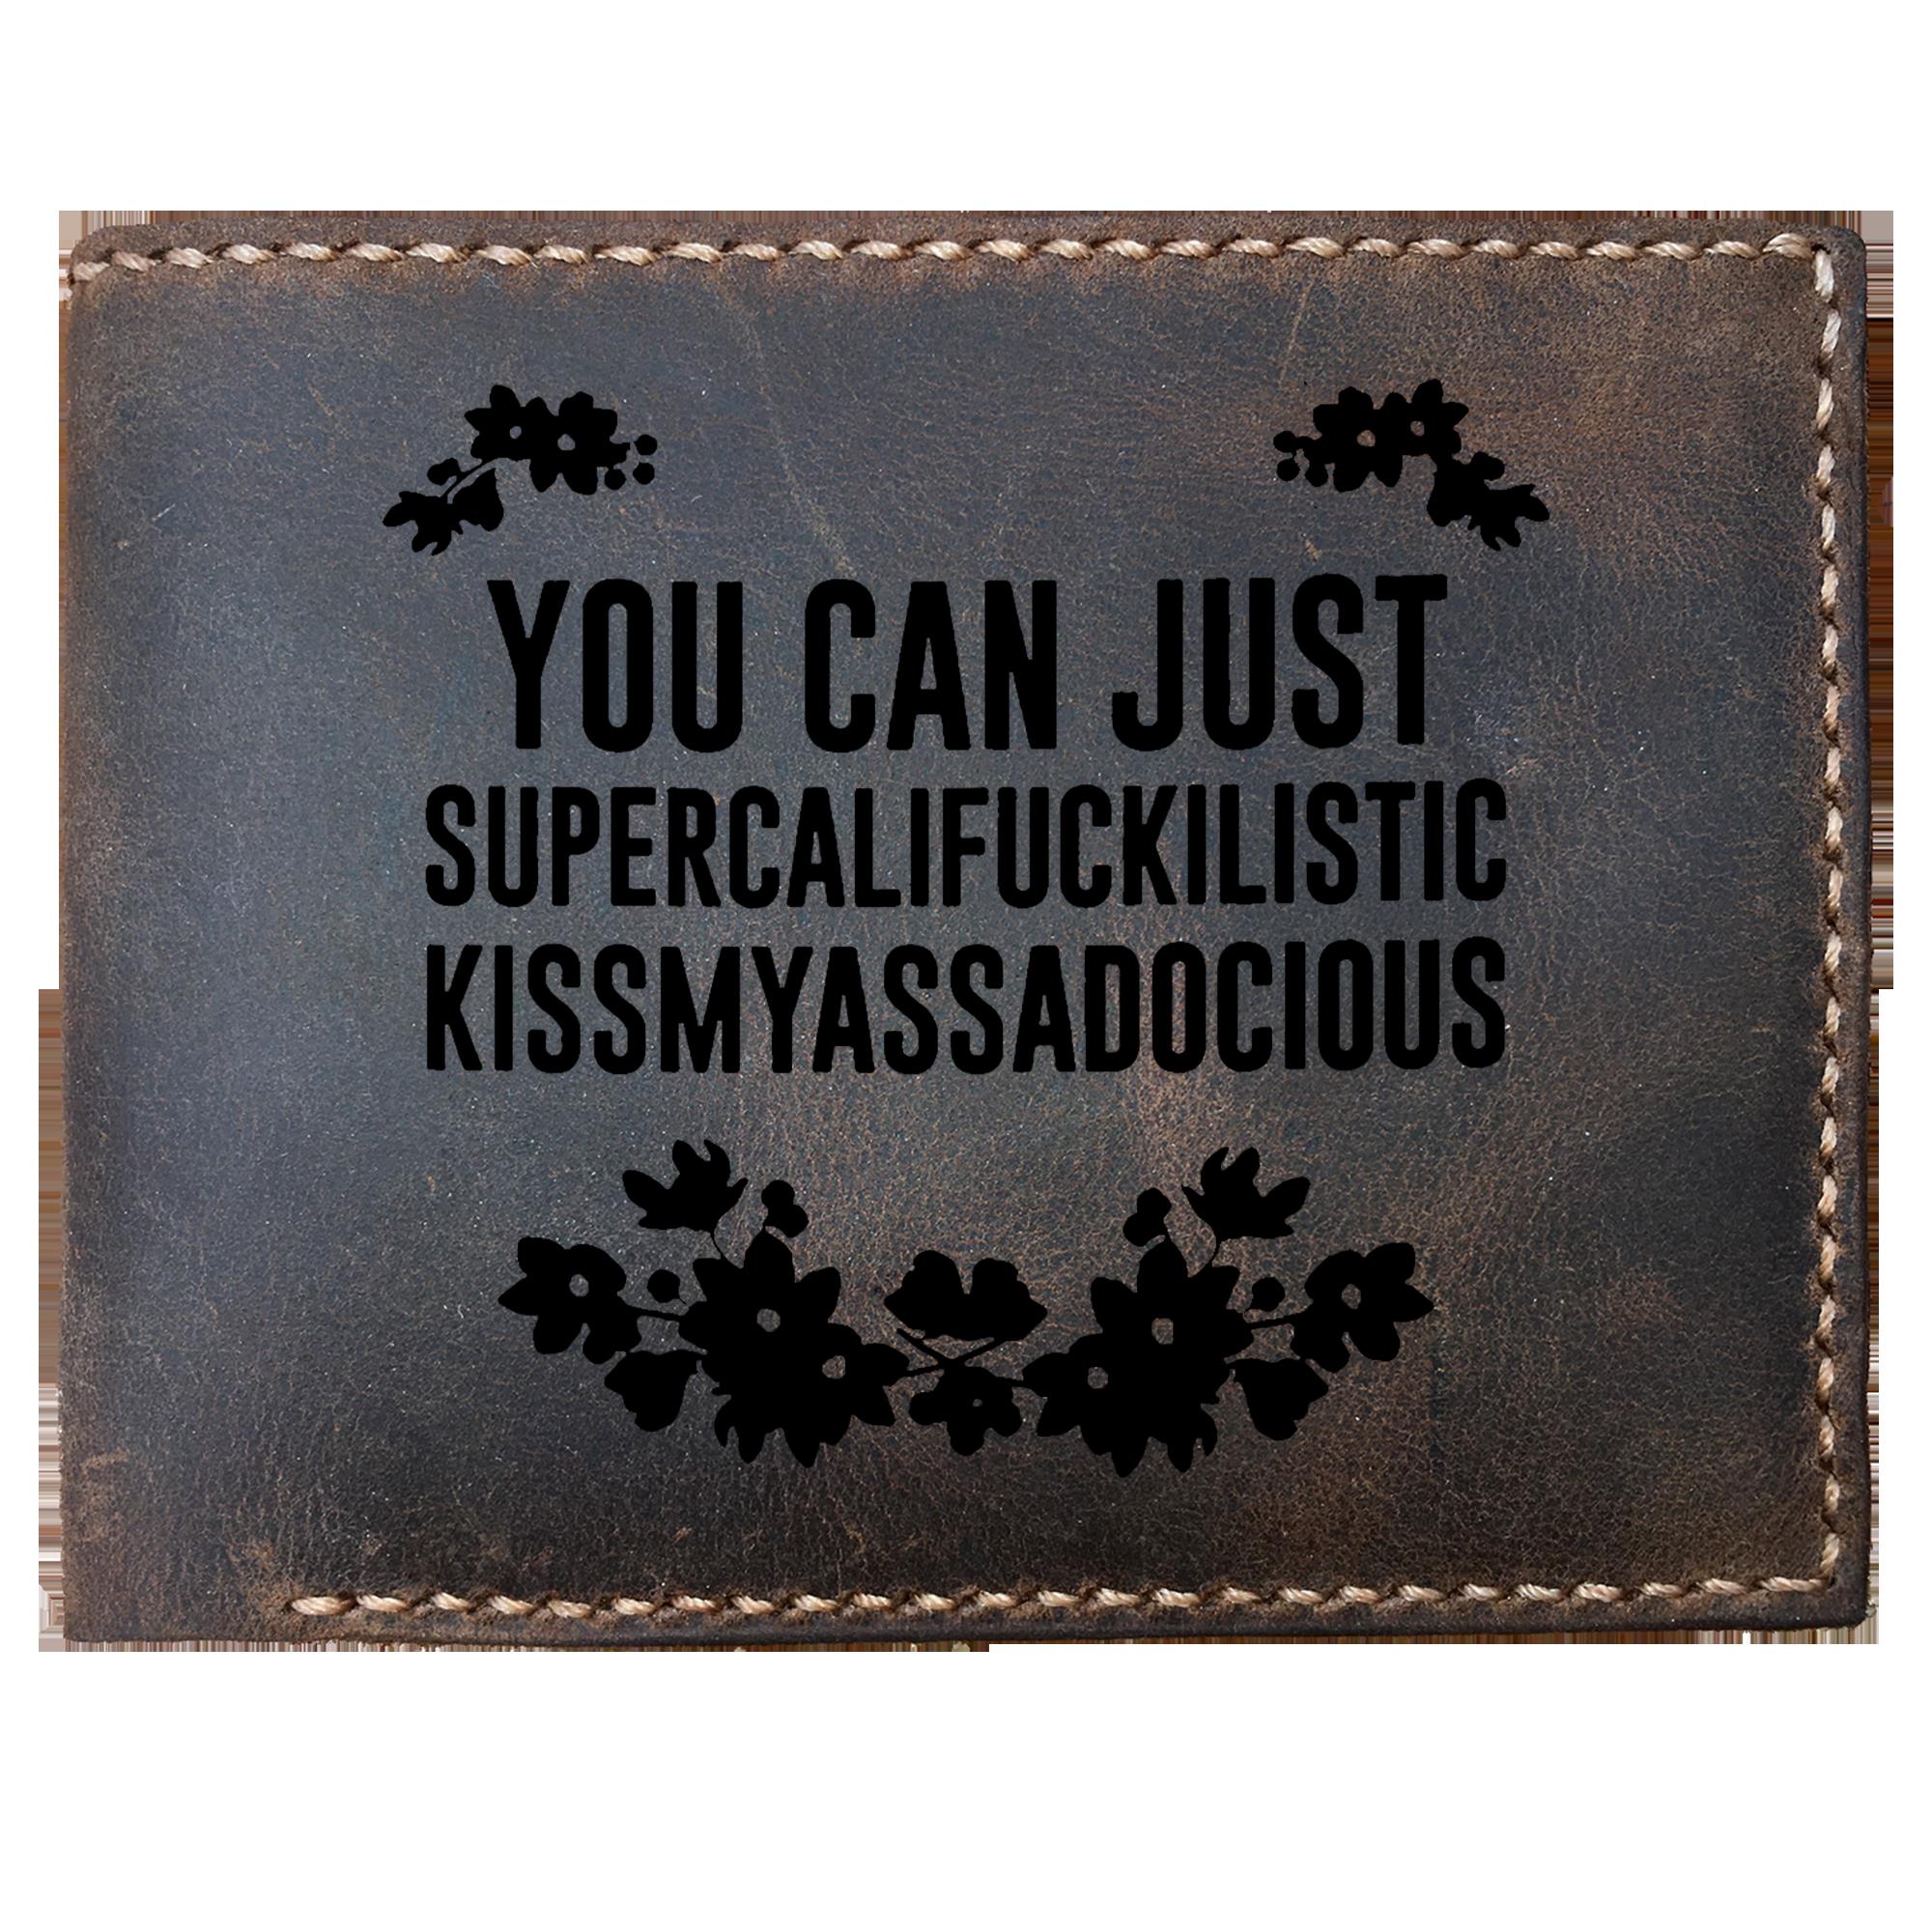 Skitongifts Funny Custom Laser Engraved Bifold Leather Wallet For Men, You Can Just Supercalifragilistic Kissmyassdocious